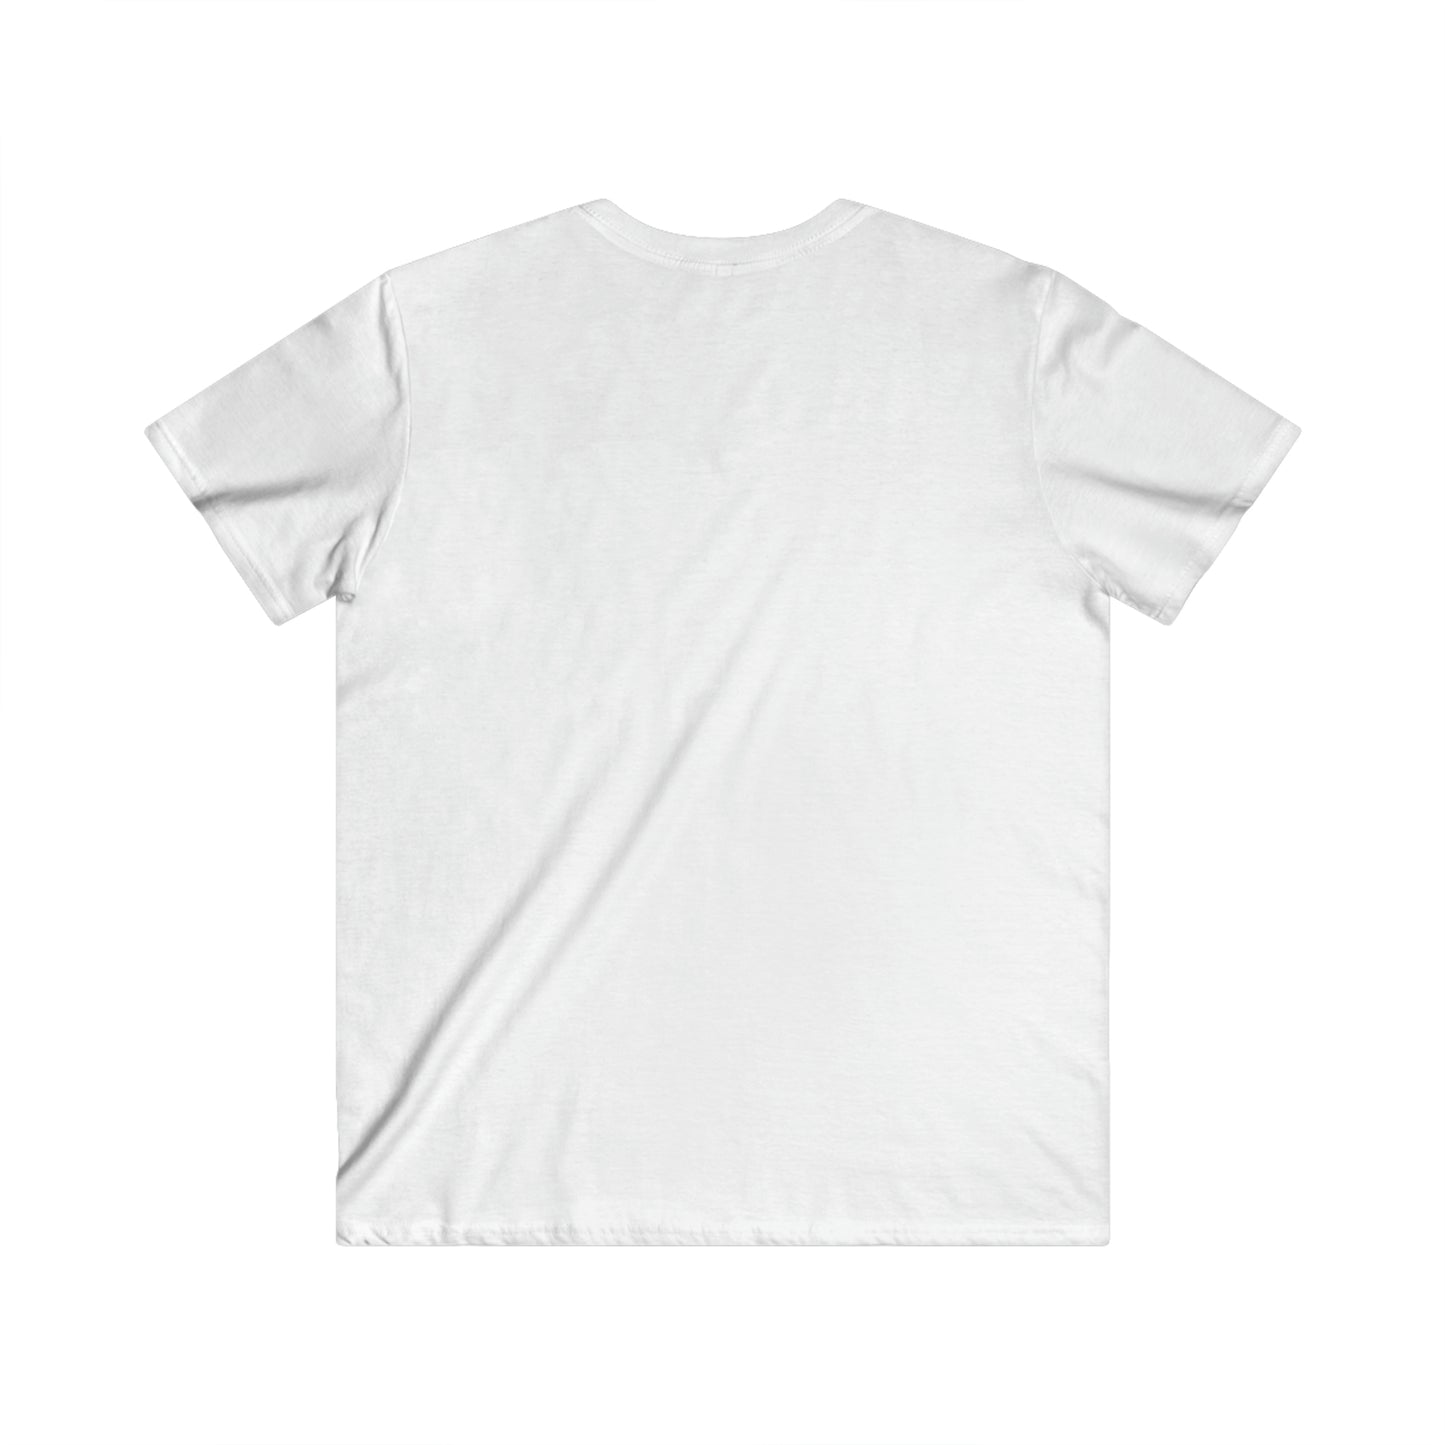 The Party Men's Fitted V-Neck Short Sleeve Tee - The Party Store